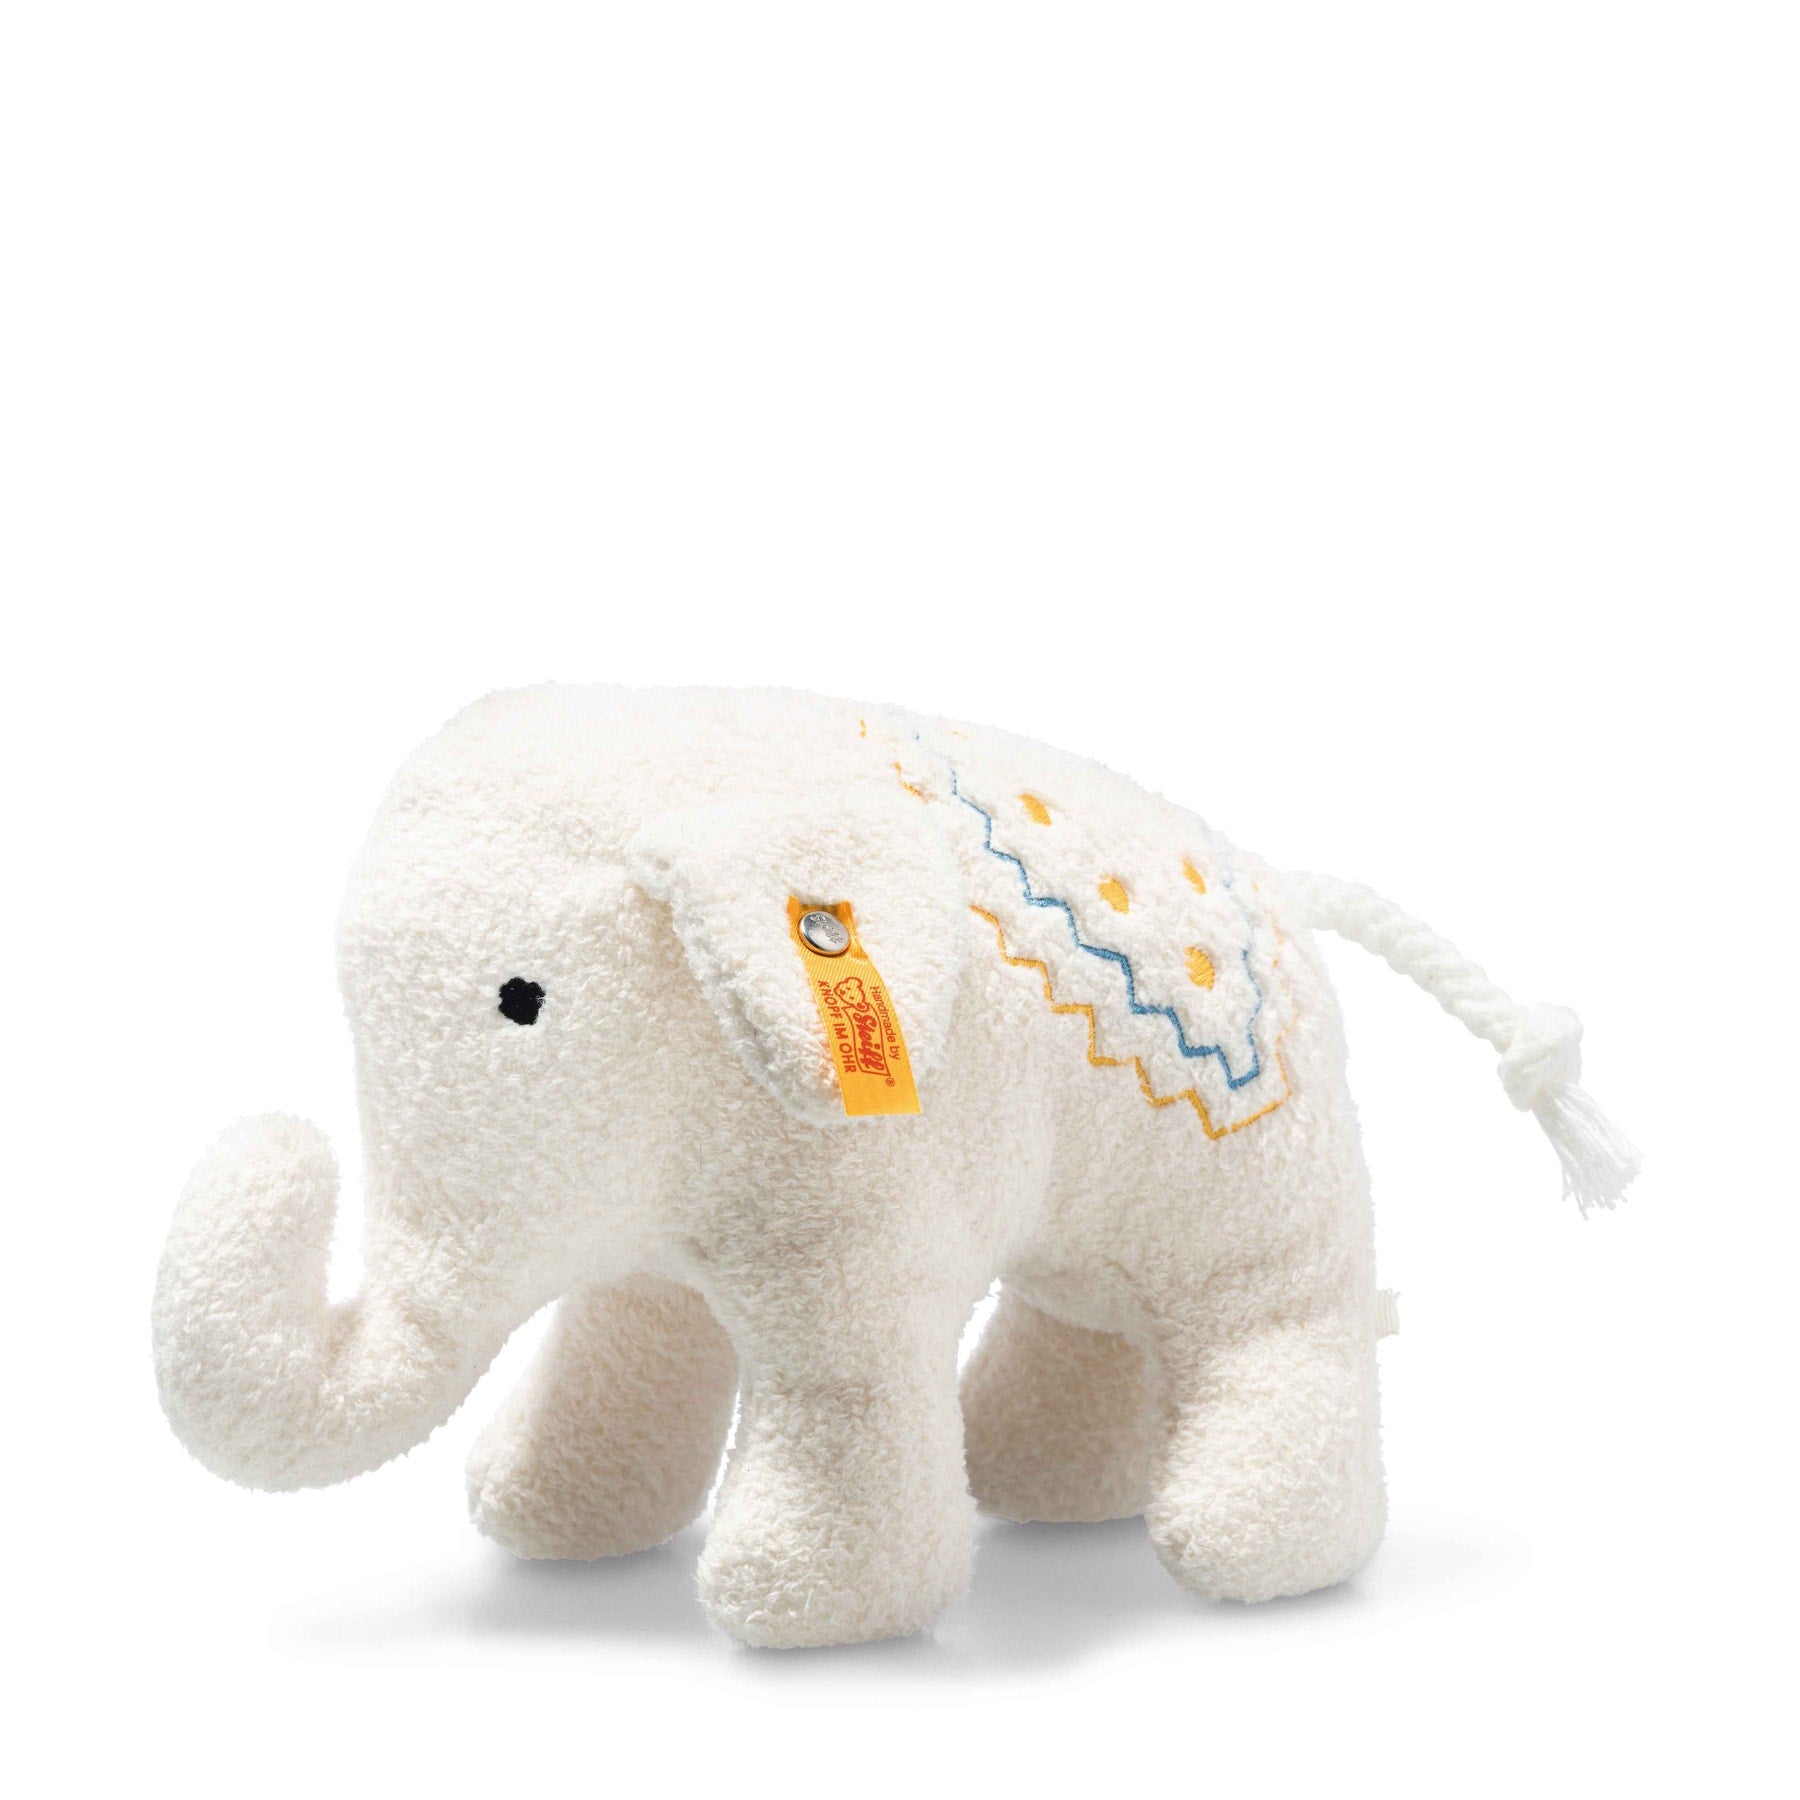 Cream elephant soft toy with yellow and blue embroidery details and a yellow Steiff tag attached to the ear